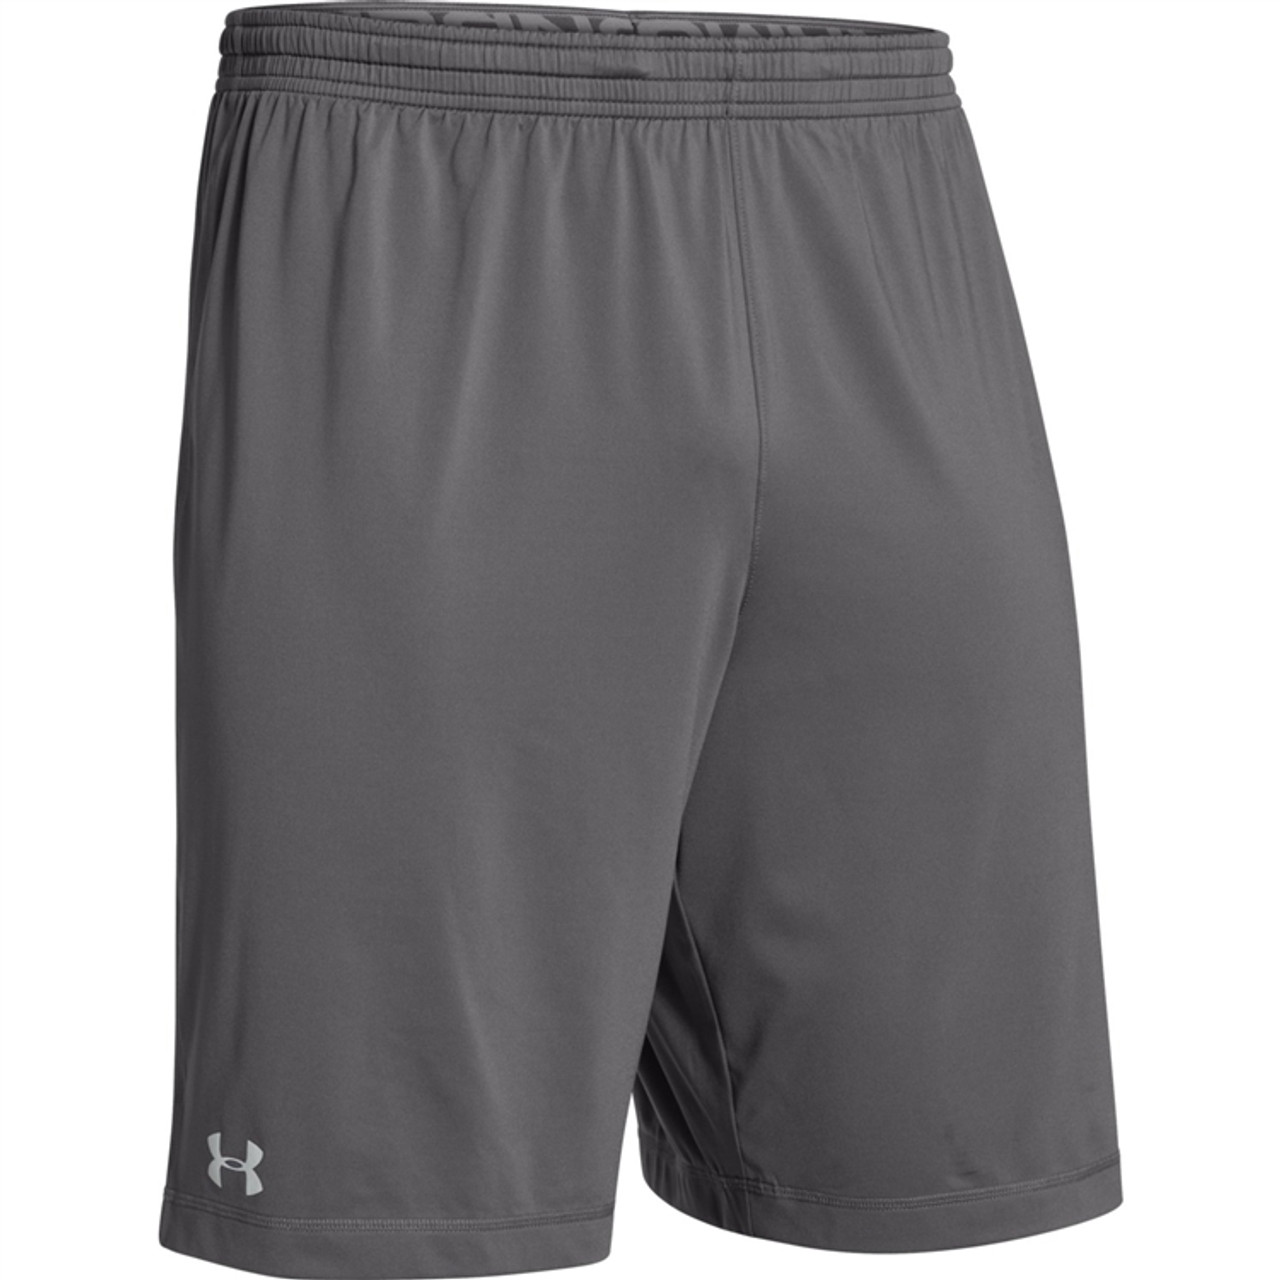  Under Armour Team Shorty 4, Black/White, Youth Small